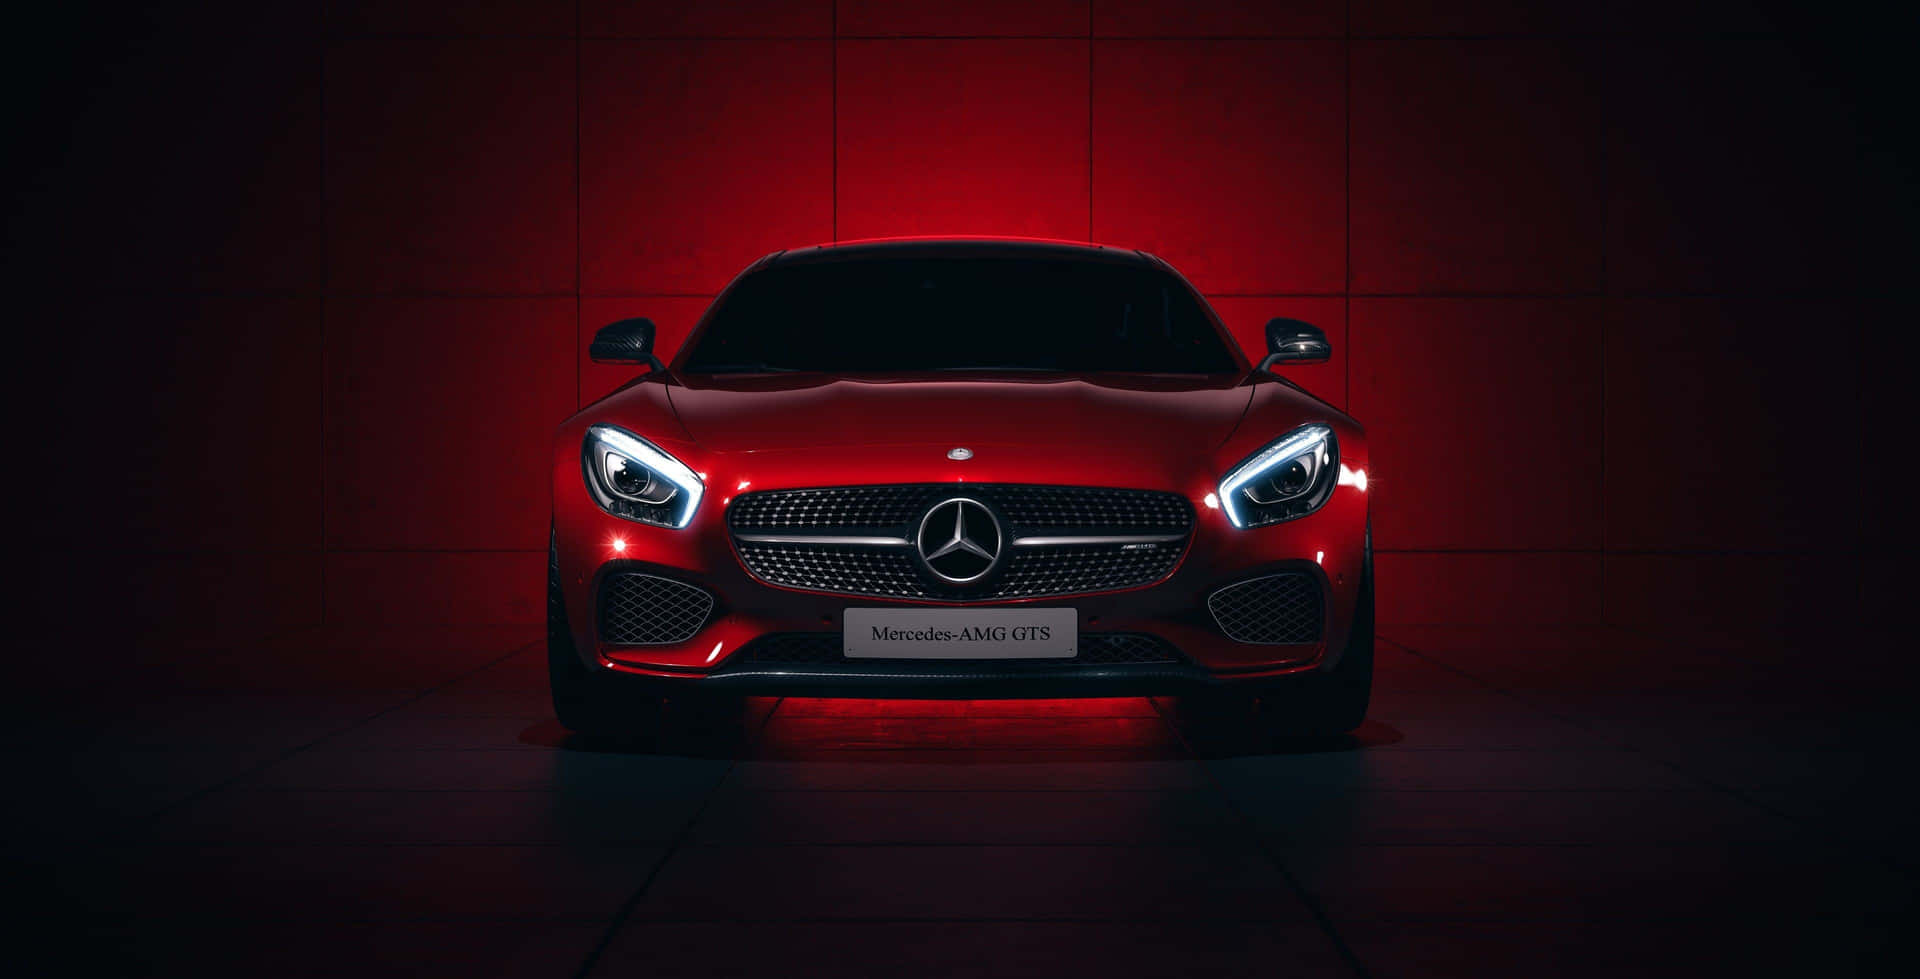 The Next Level of Automotive Excellence - Mercedes AMG GT Wallpaper